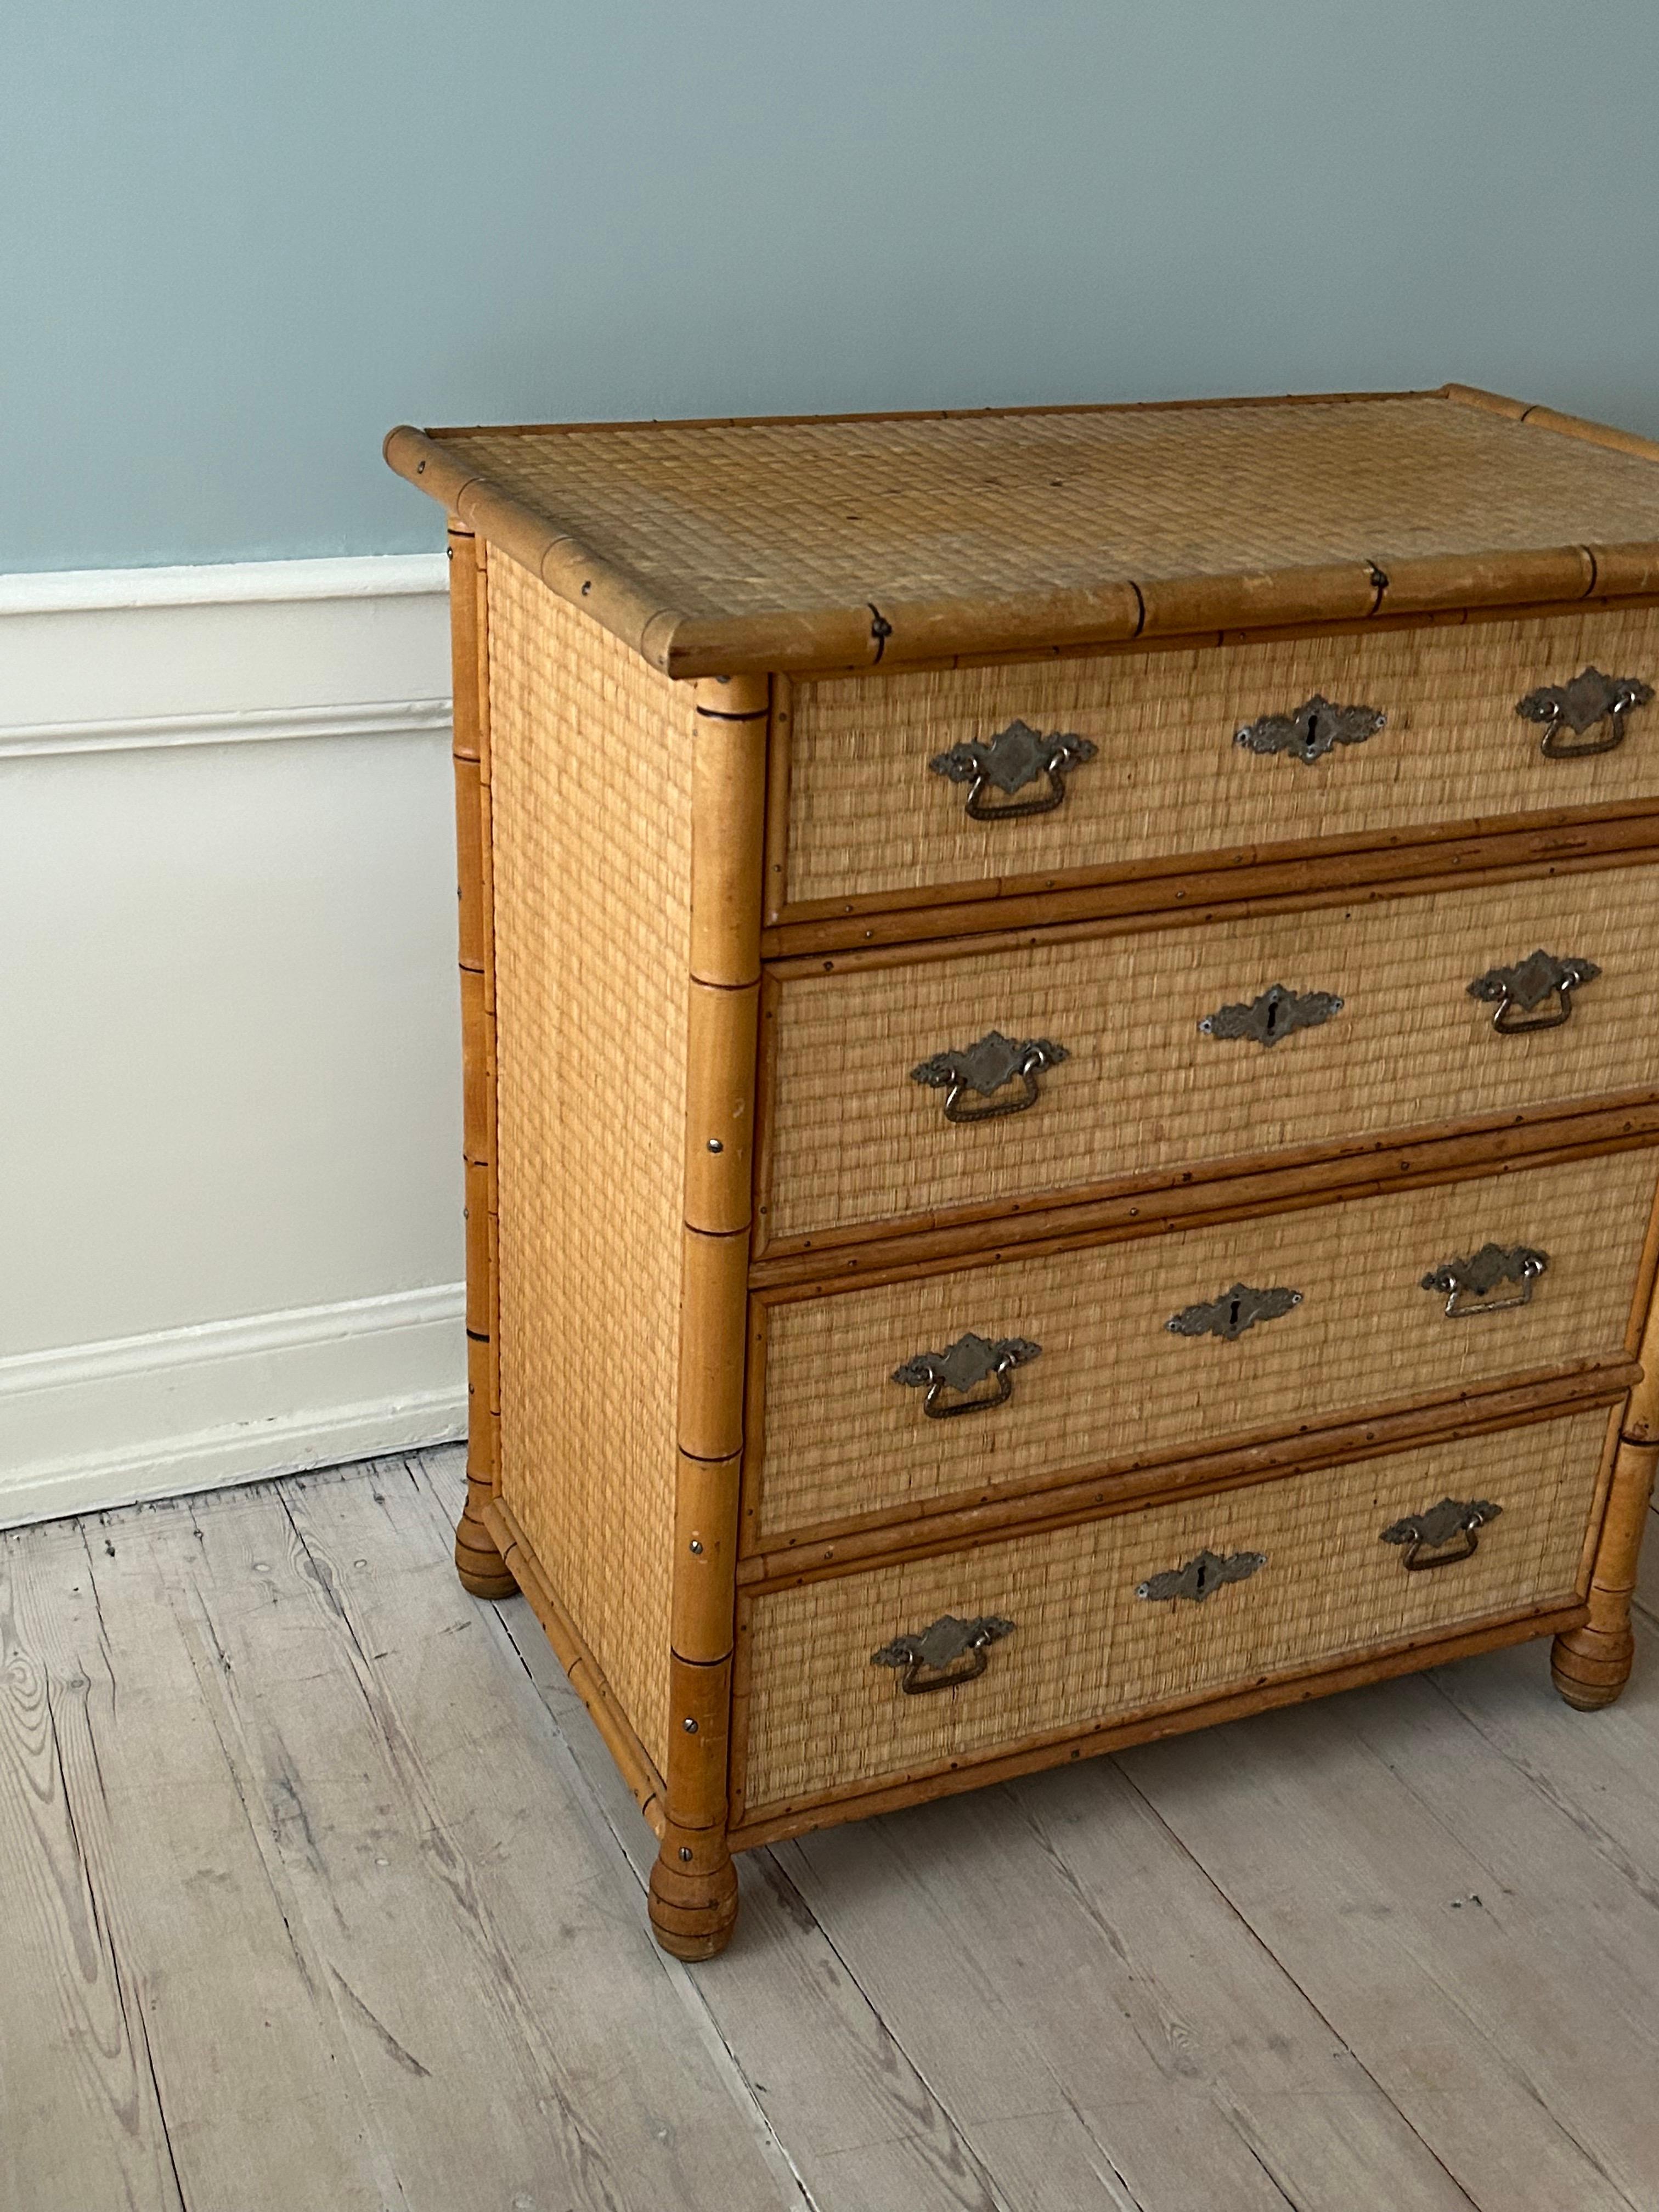 Antique Chest of Drawers in Japanese Straw and Beech Wood, Sweden, 19th Century For Sale 2